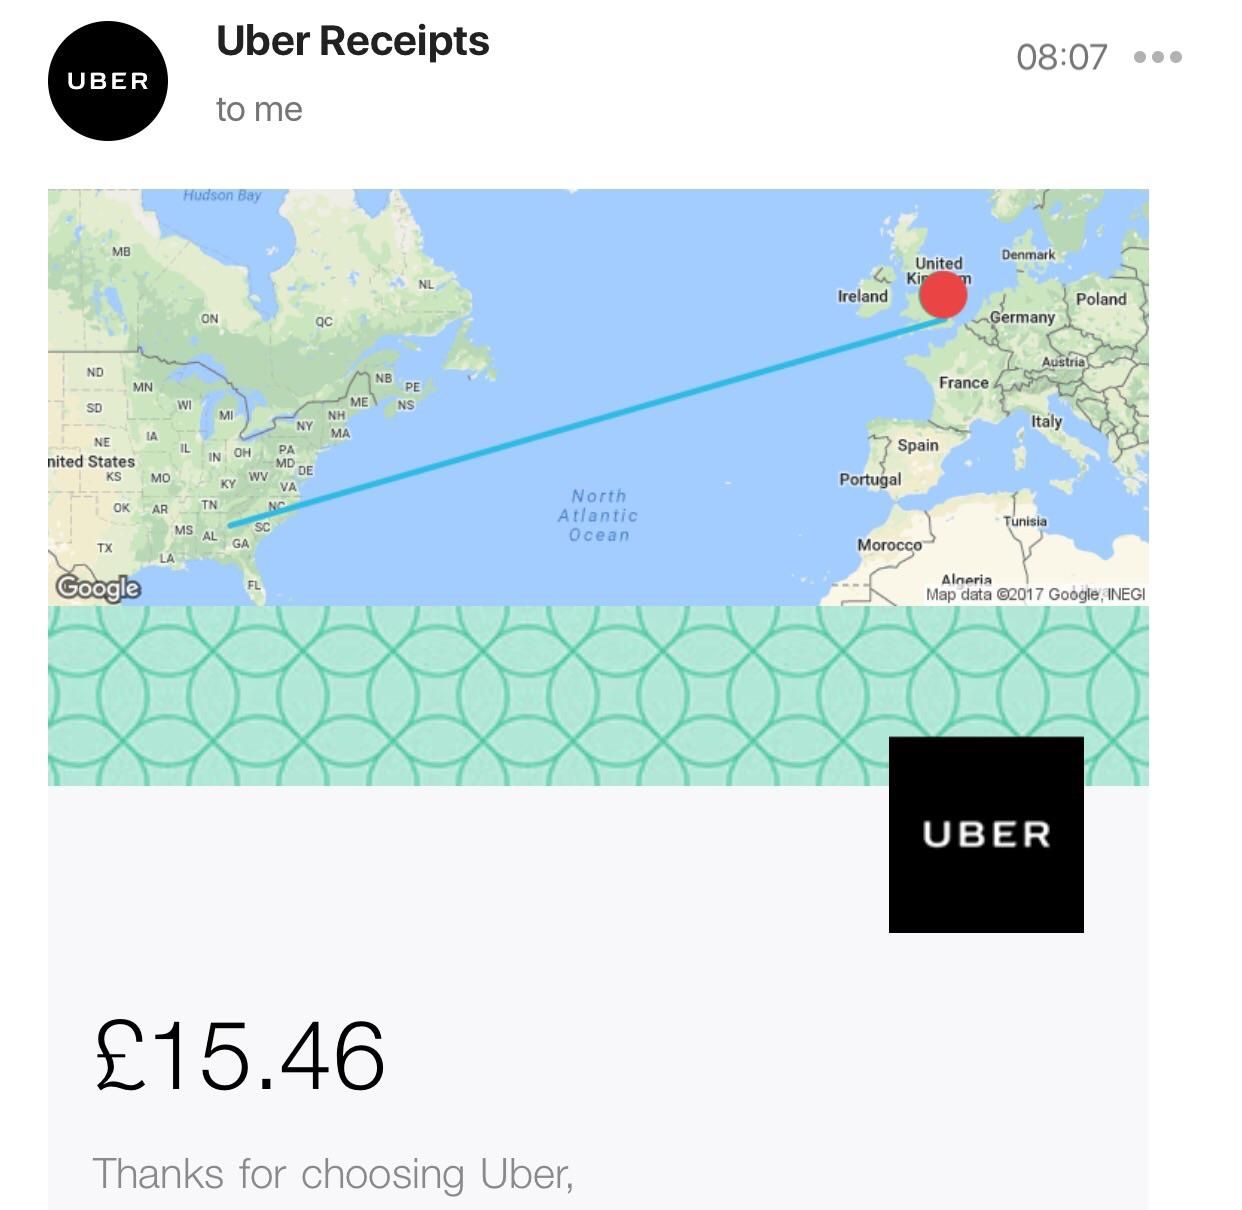 And people say uber is expensive...